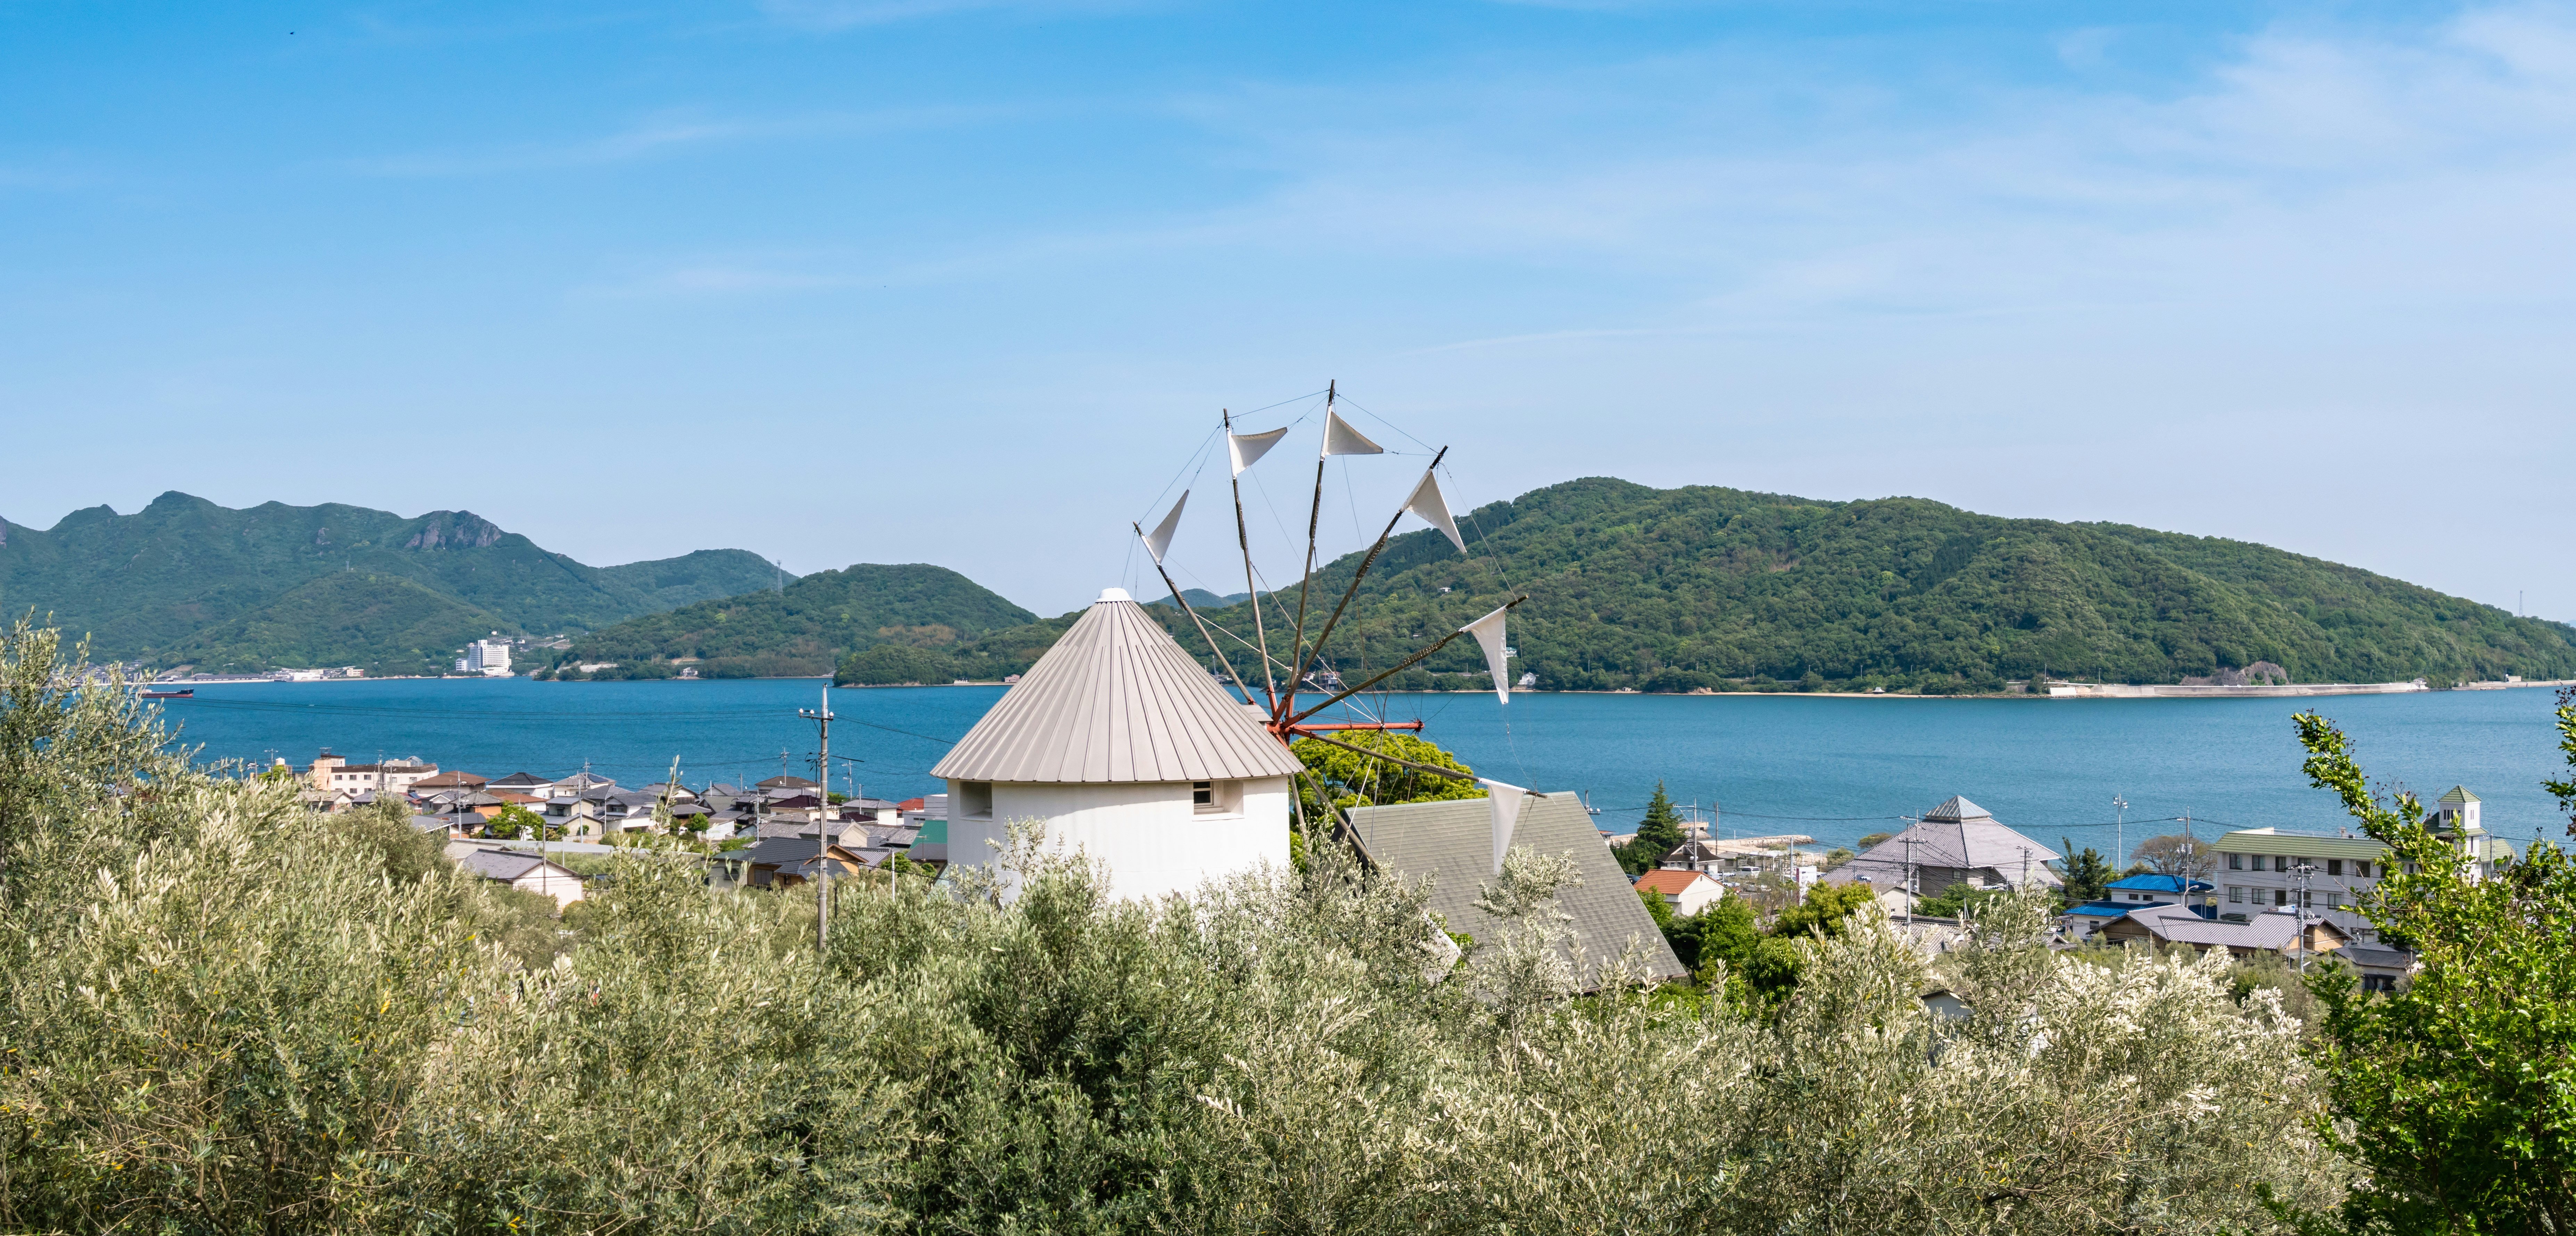 A white windmill with flag-like silver blades and a round silver conical roof overlooks the ocean and green forested islands across the bay. In the foreground are the olive groves of Shdoshima in Kagawa Prefecture, the first place to cultivate olives in Japan